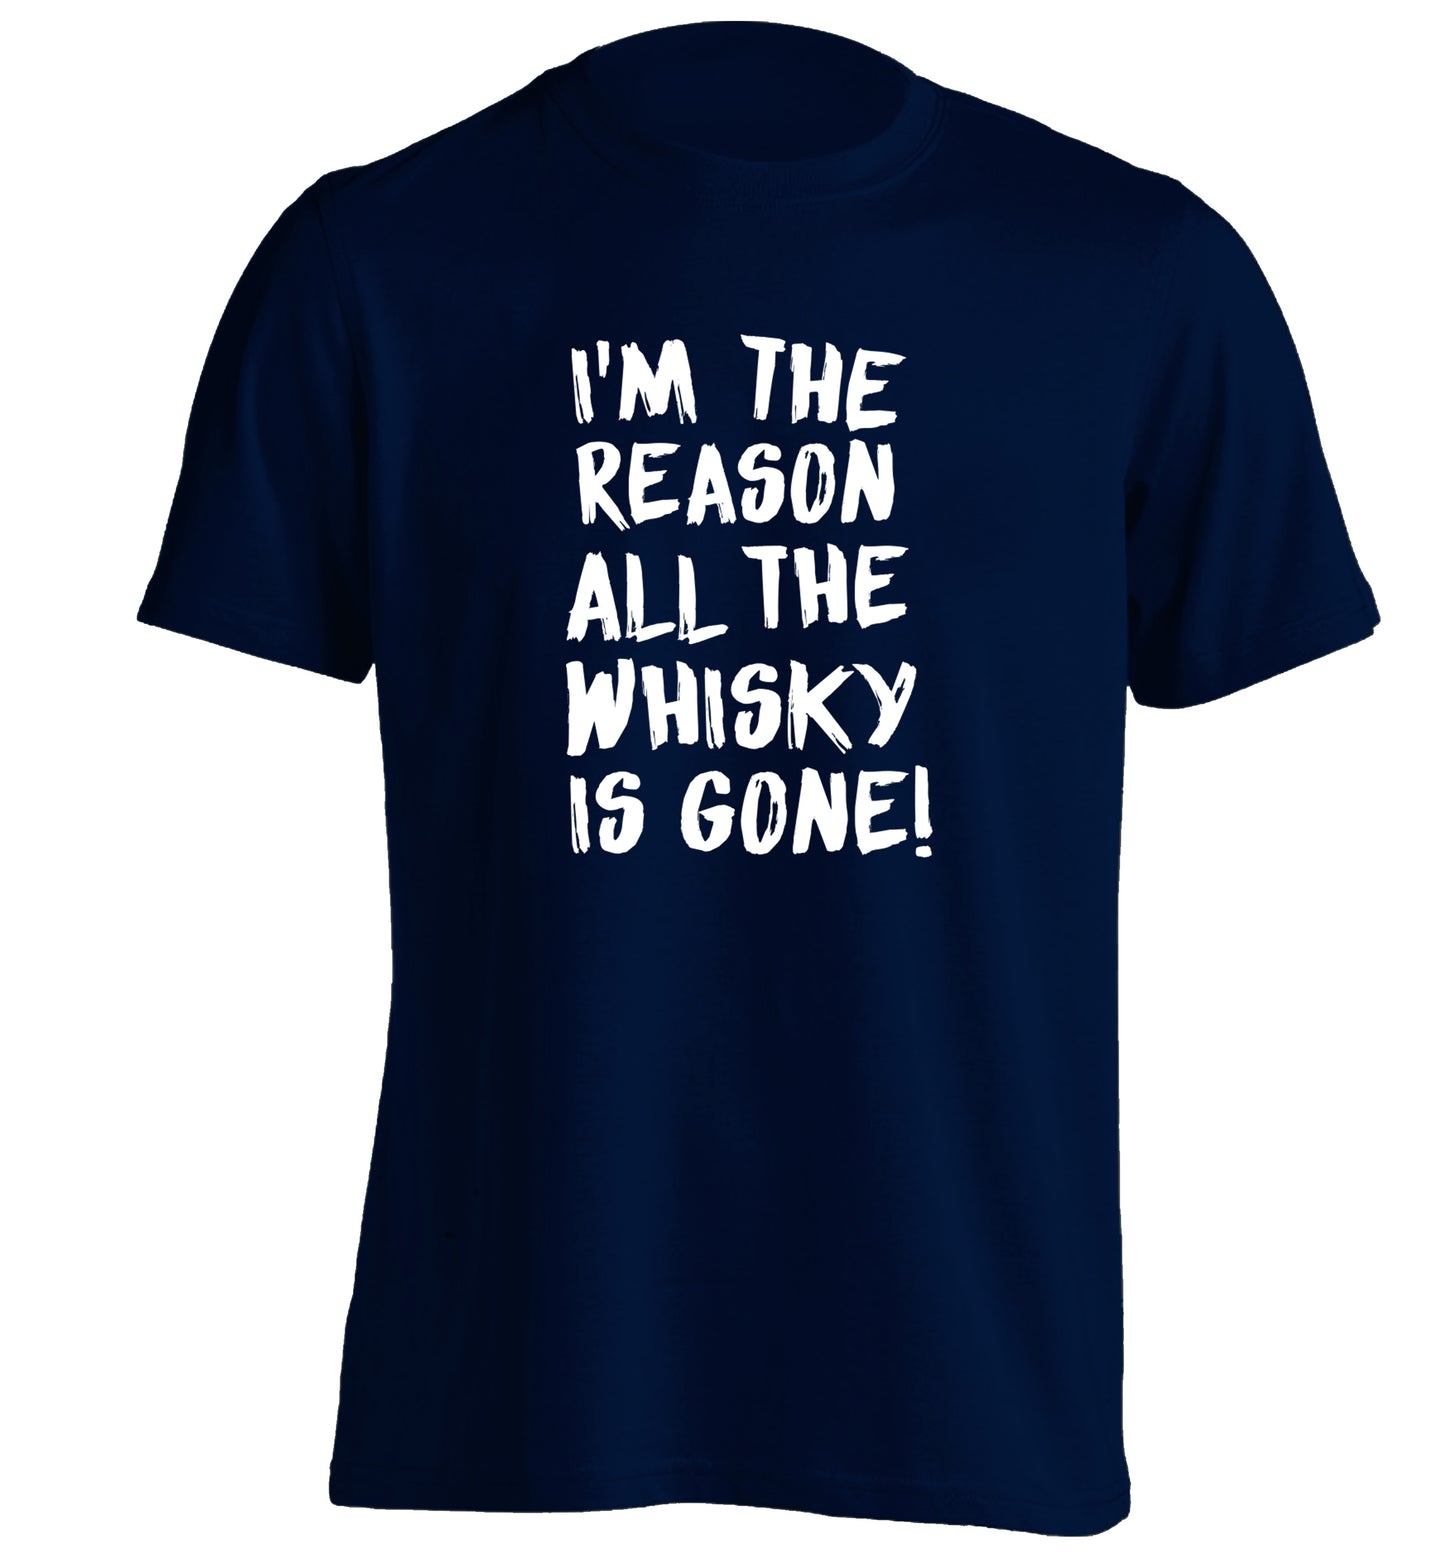 I'm the reason all the whisky is gone adults unisex navy Tshirt 2XL